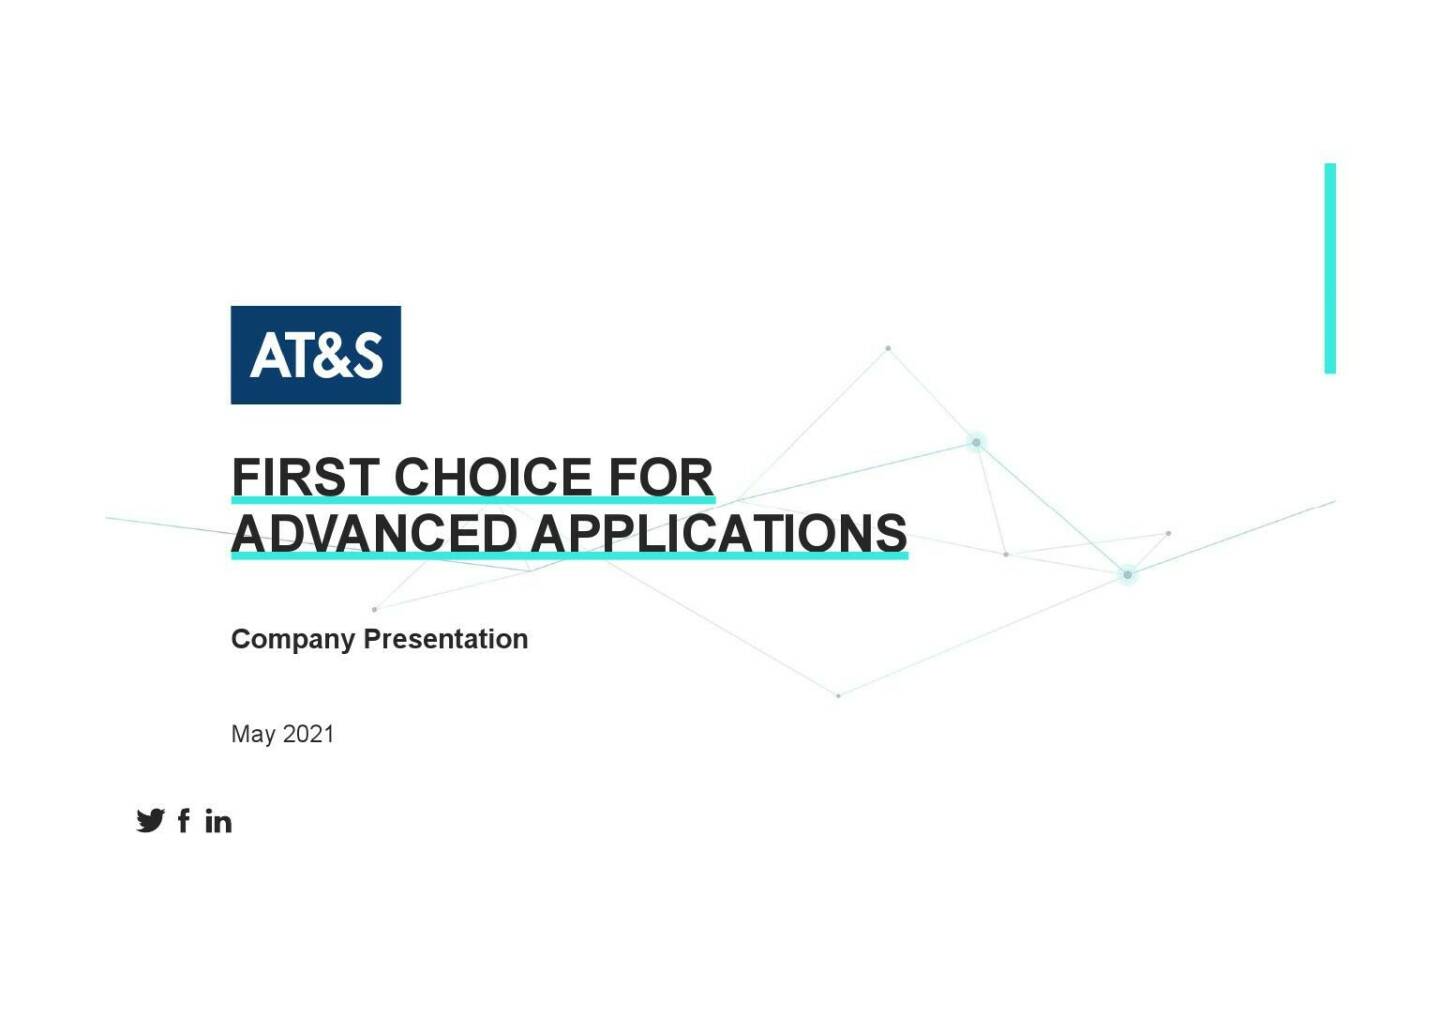 AT&S - First choice for advanced applications